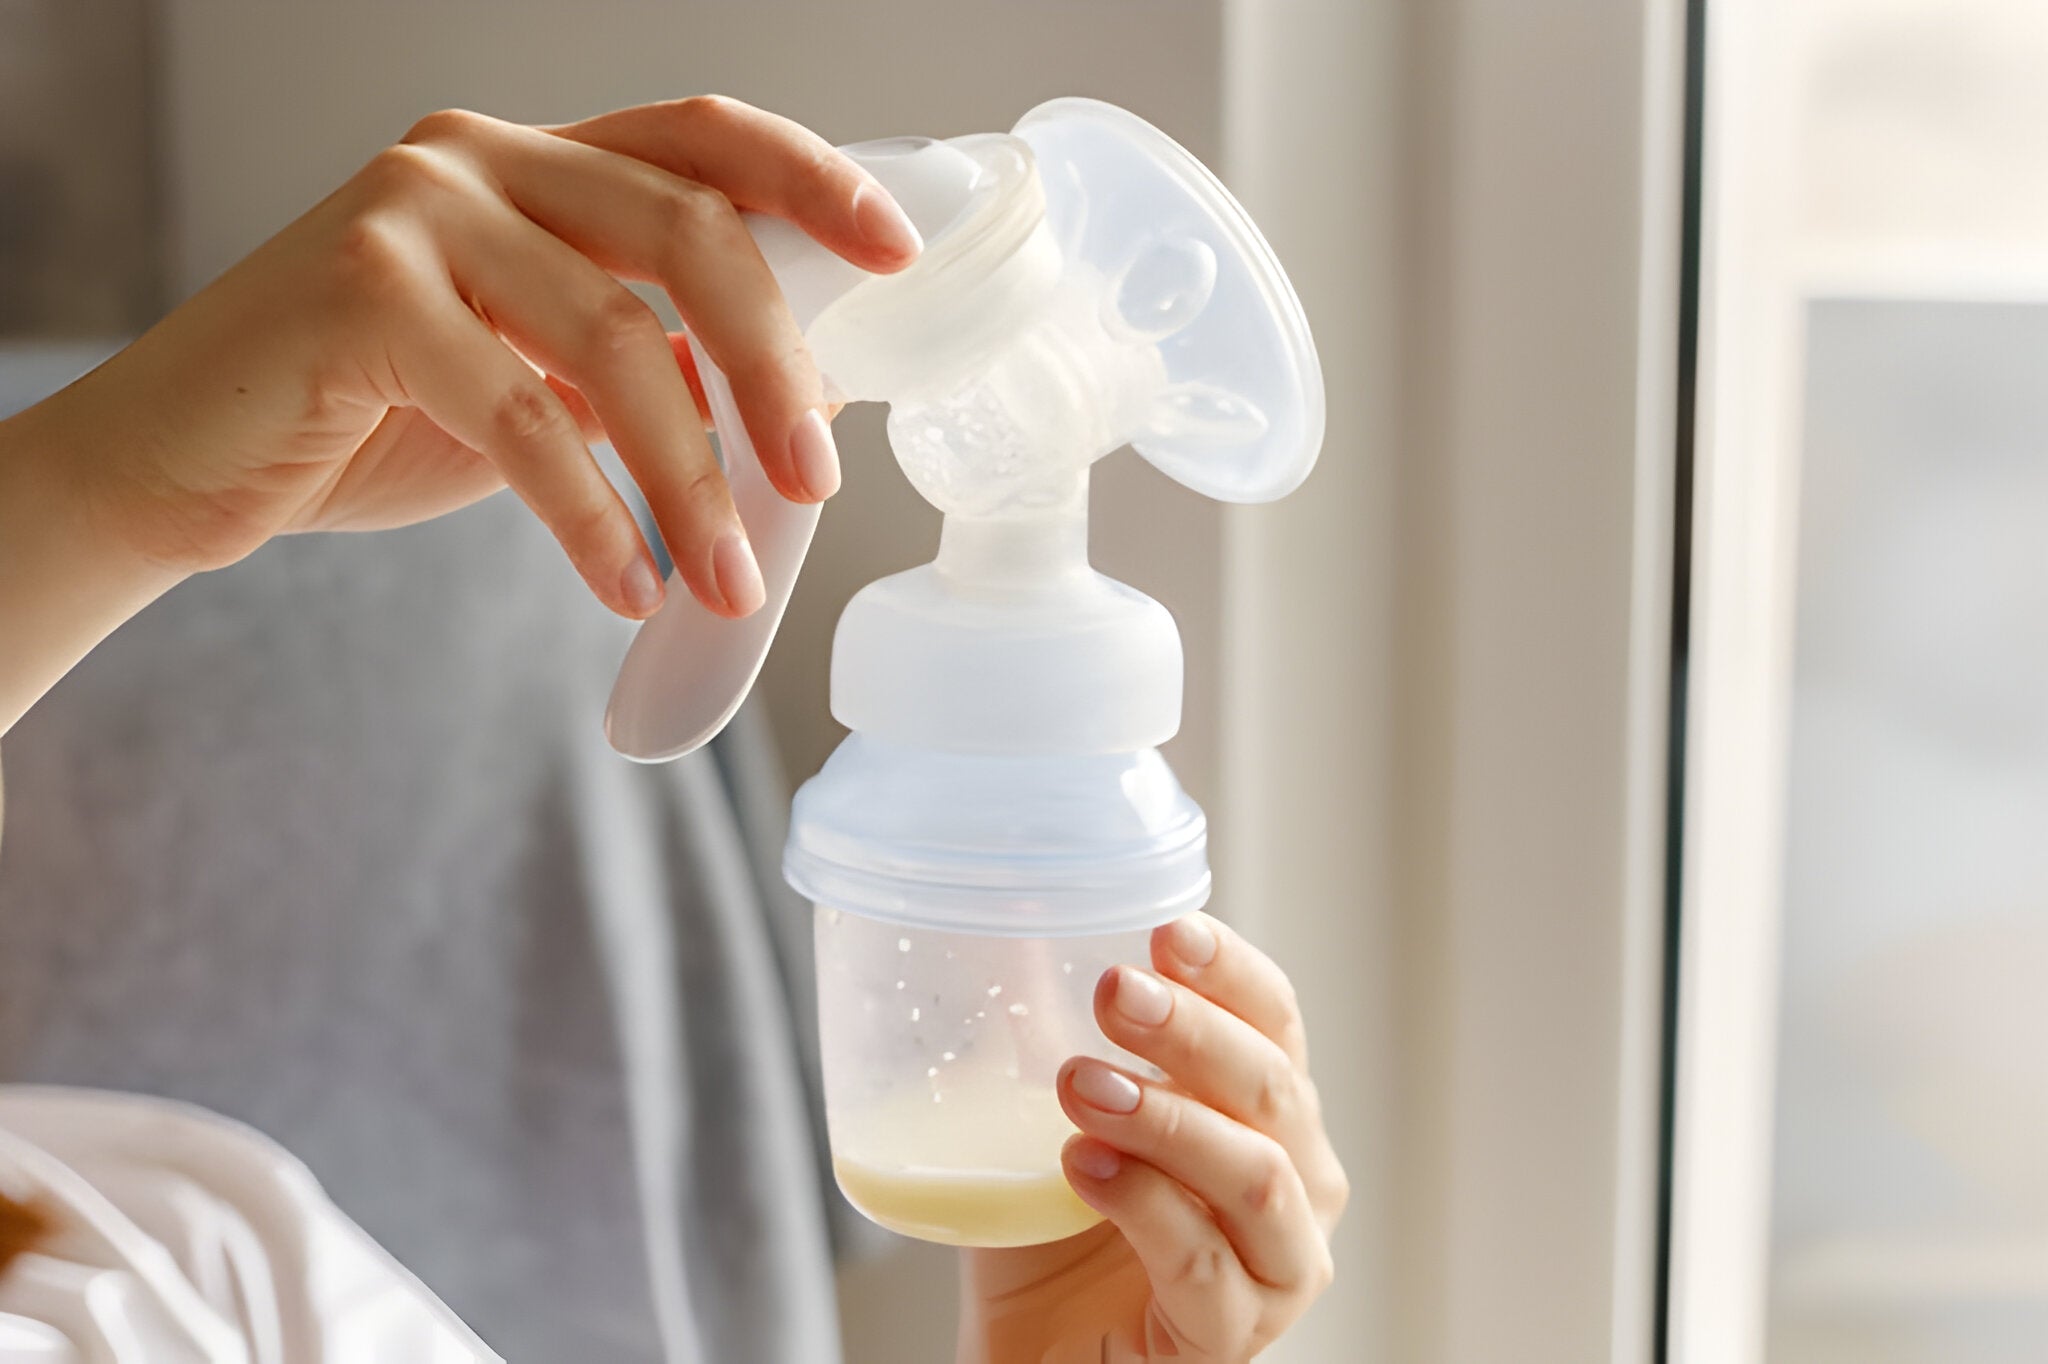 Mother holding her recently pumped breast milk in a baby bottle.